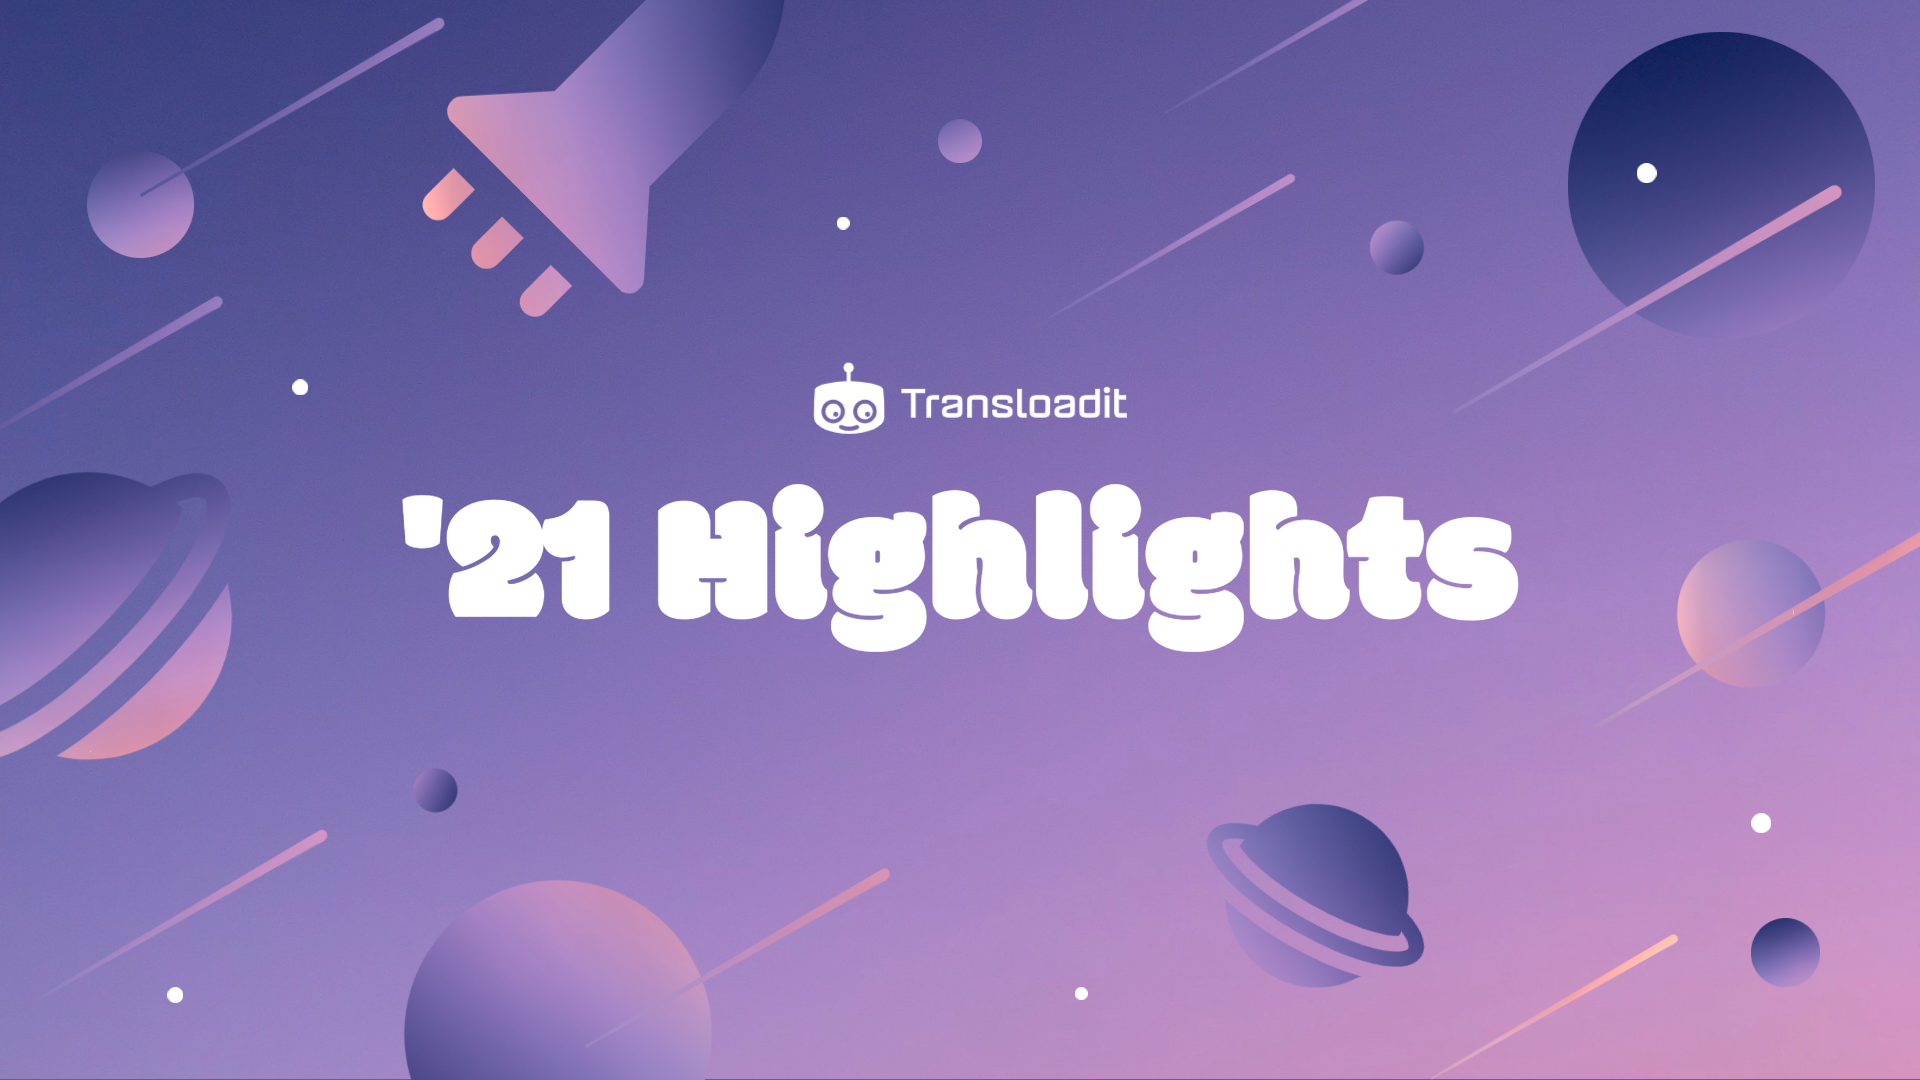 Vector art lilac background with rockets, planets and stars. The text '21 Highlights is in the foreground with the Transloadit logo just above.